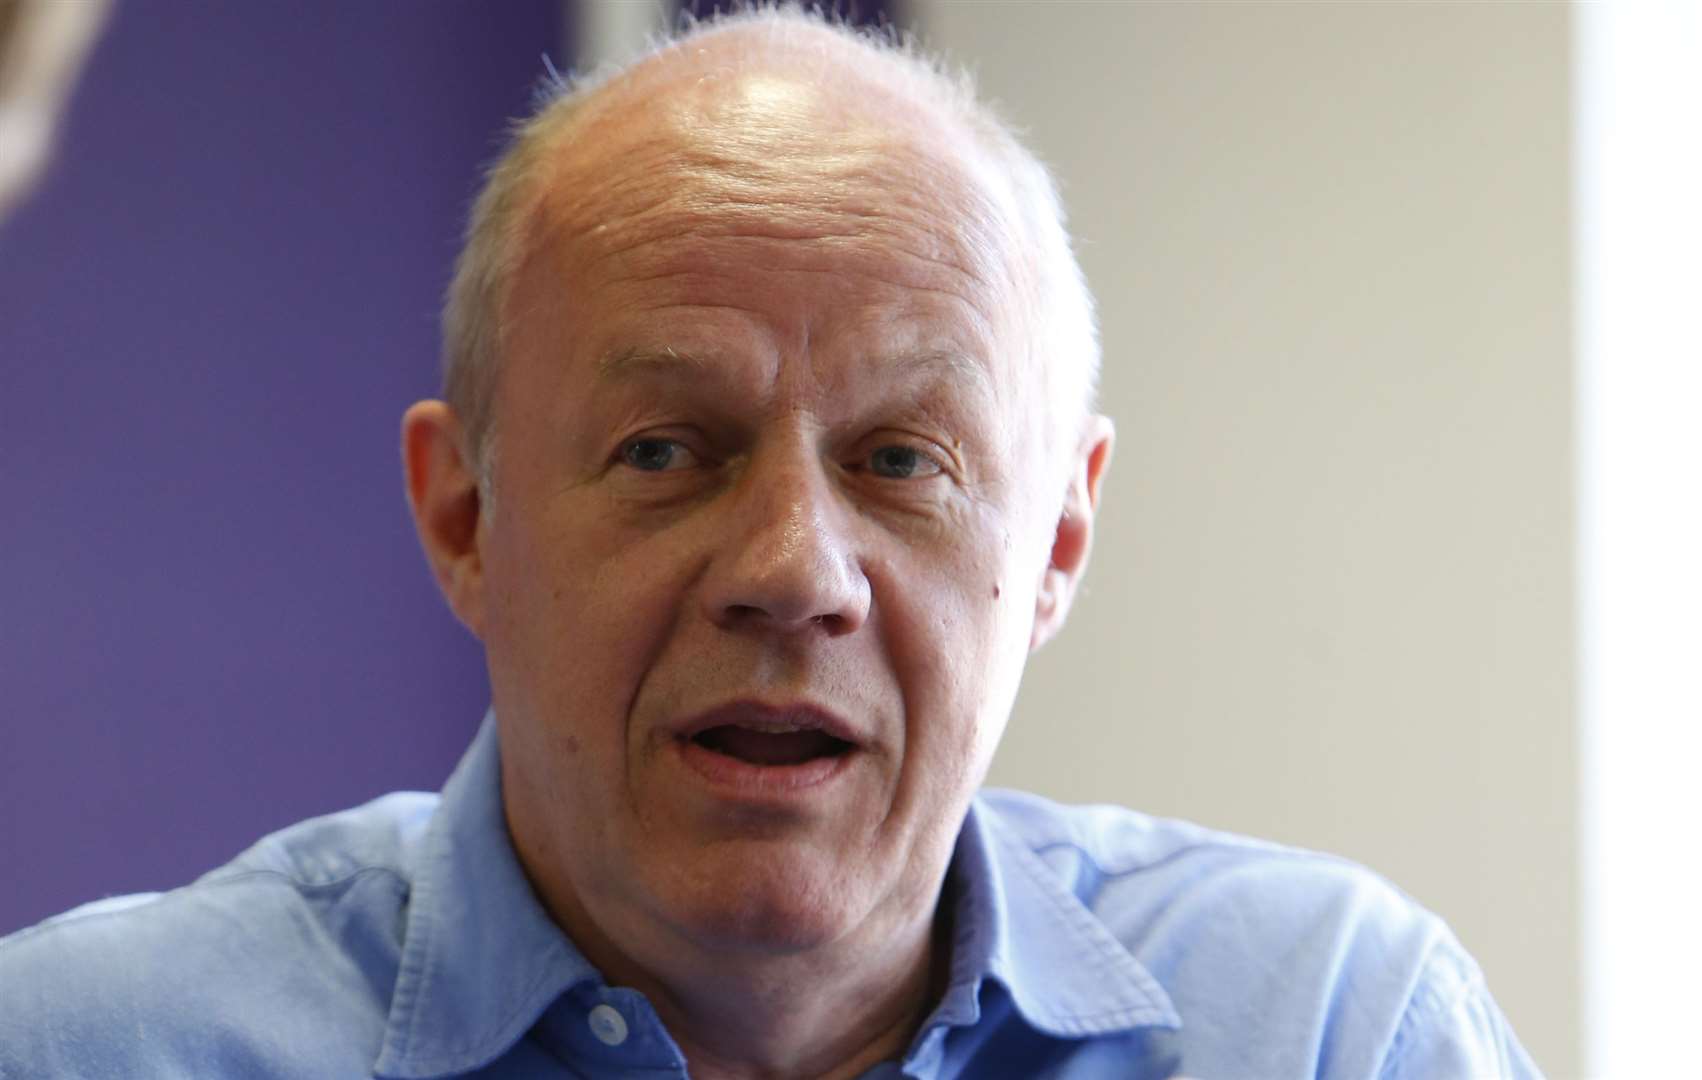 Damian Green thinks the idea of a super hospital is mad